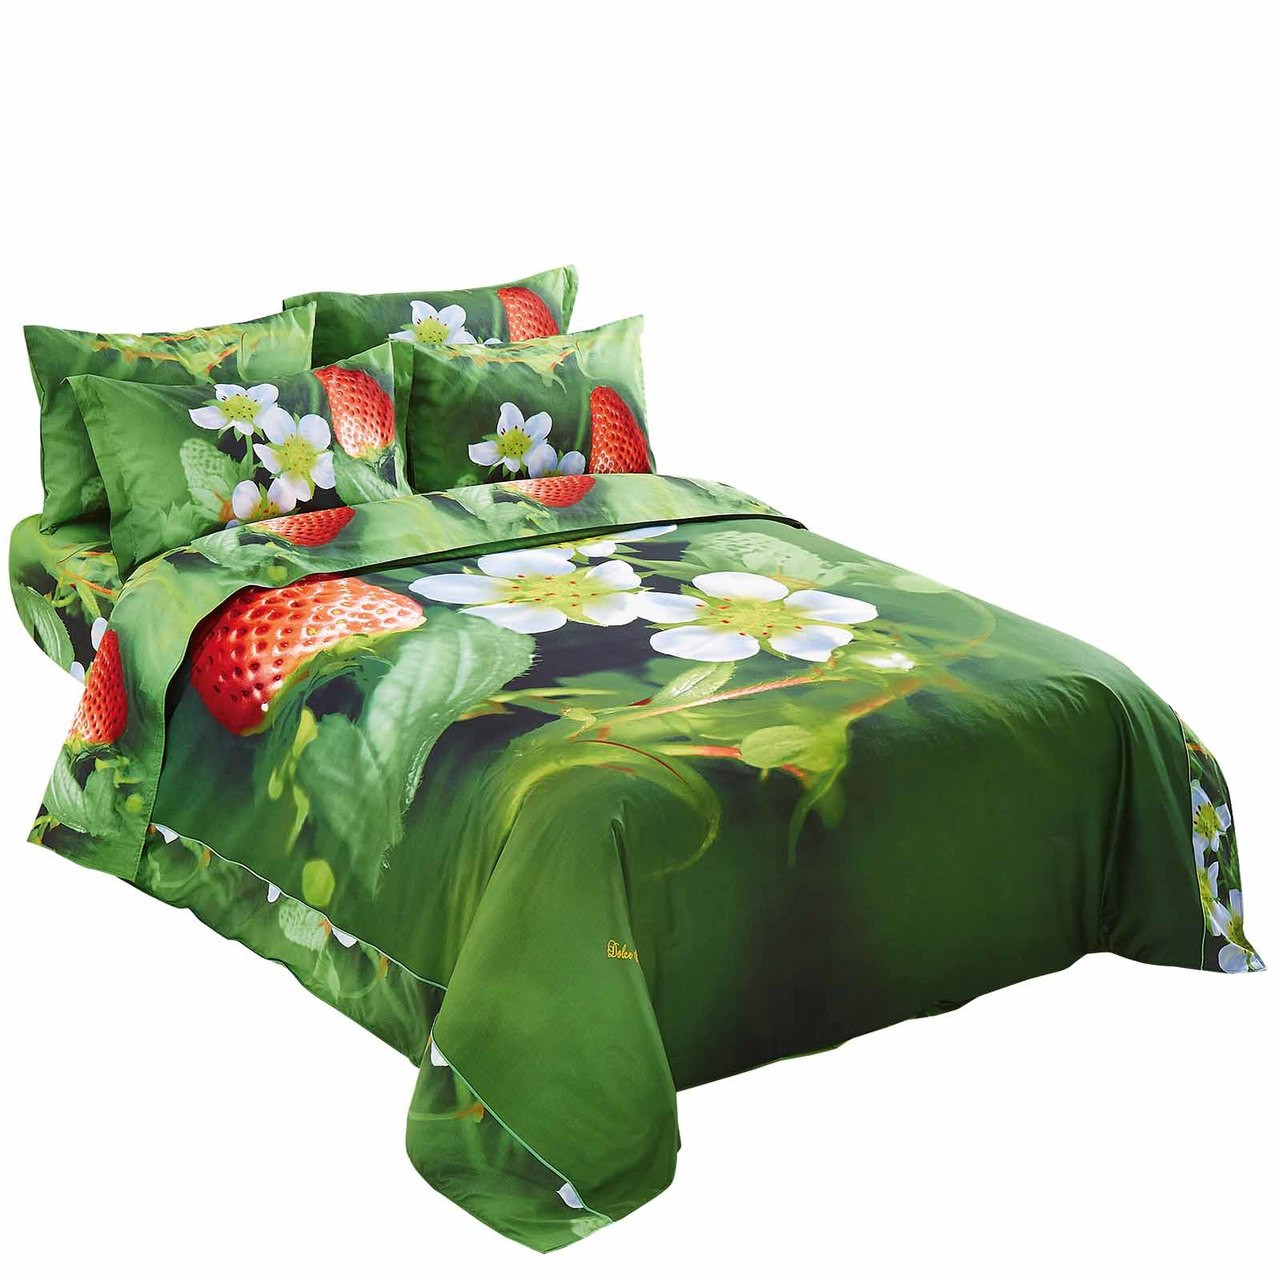 Queen Fitted Bedding Dolce Mela DM512Q